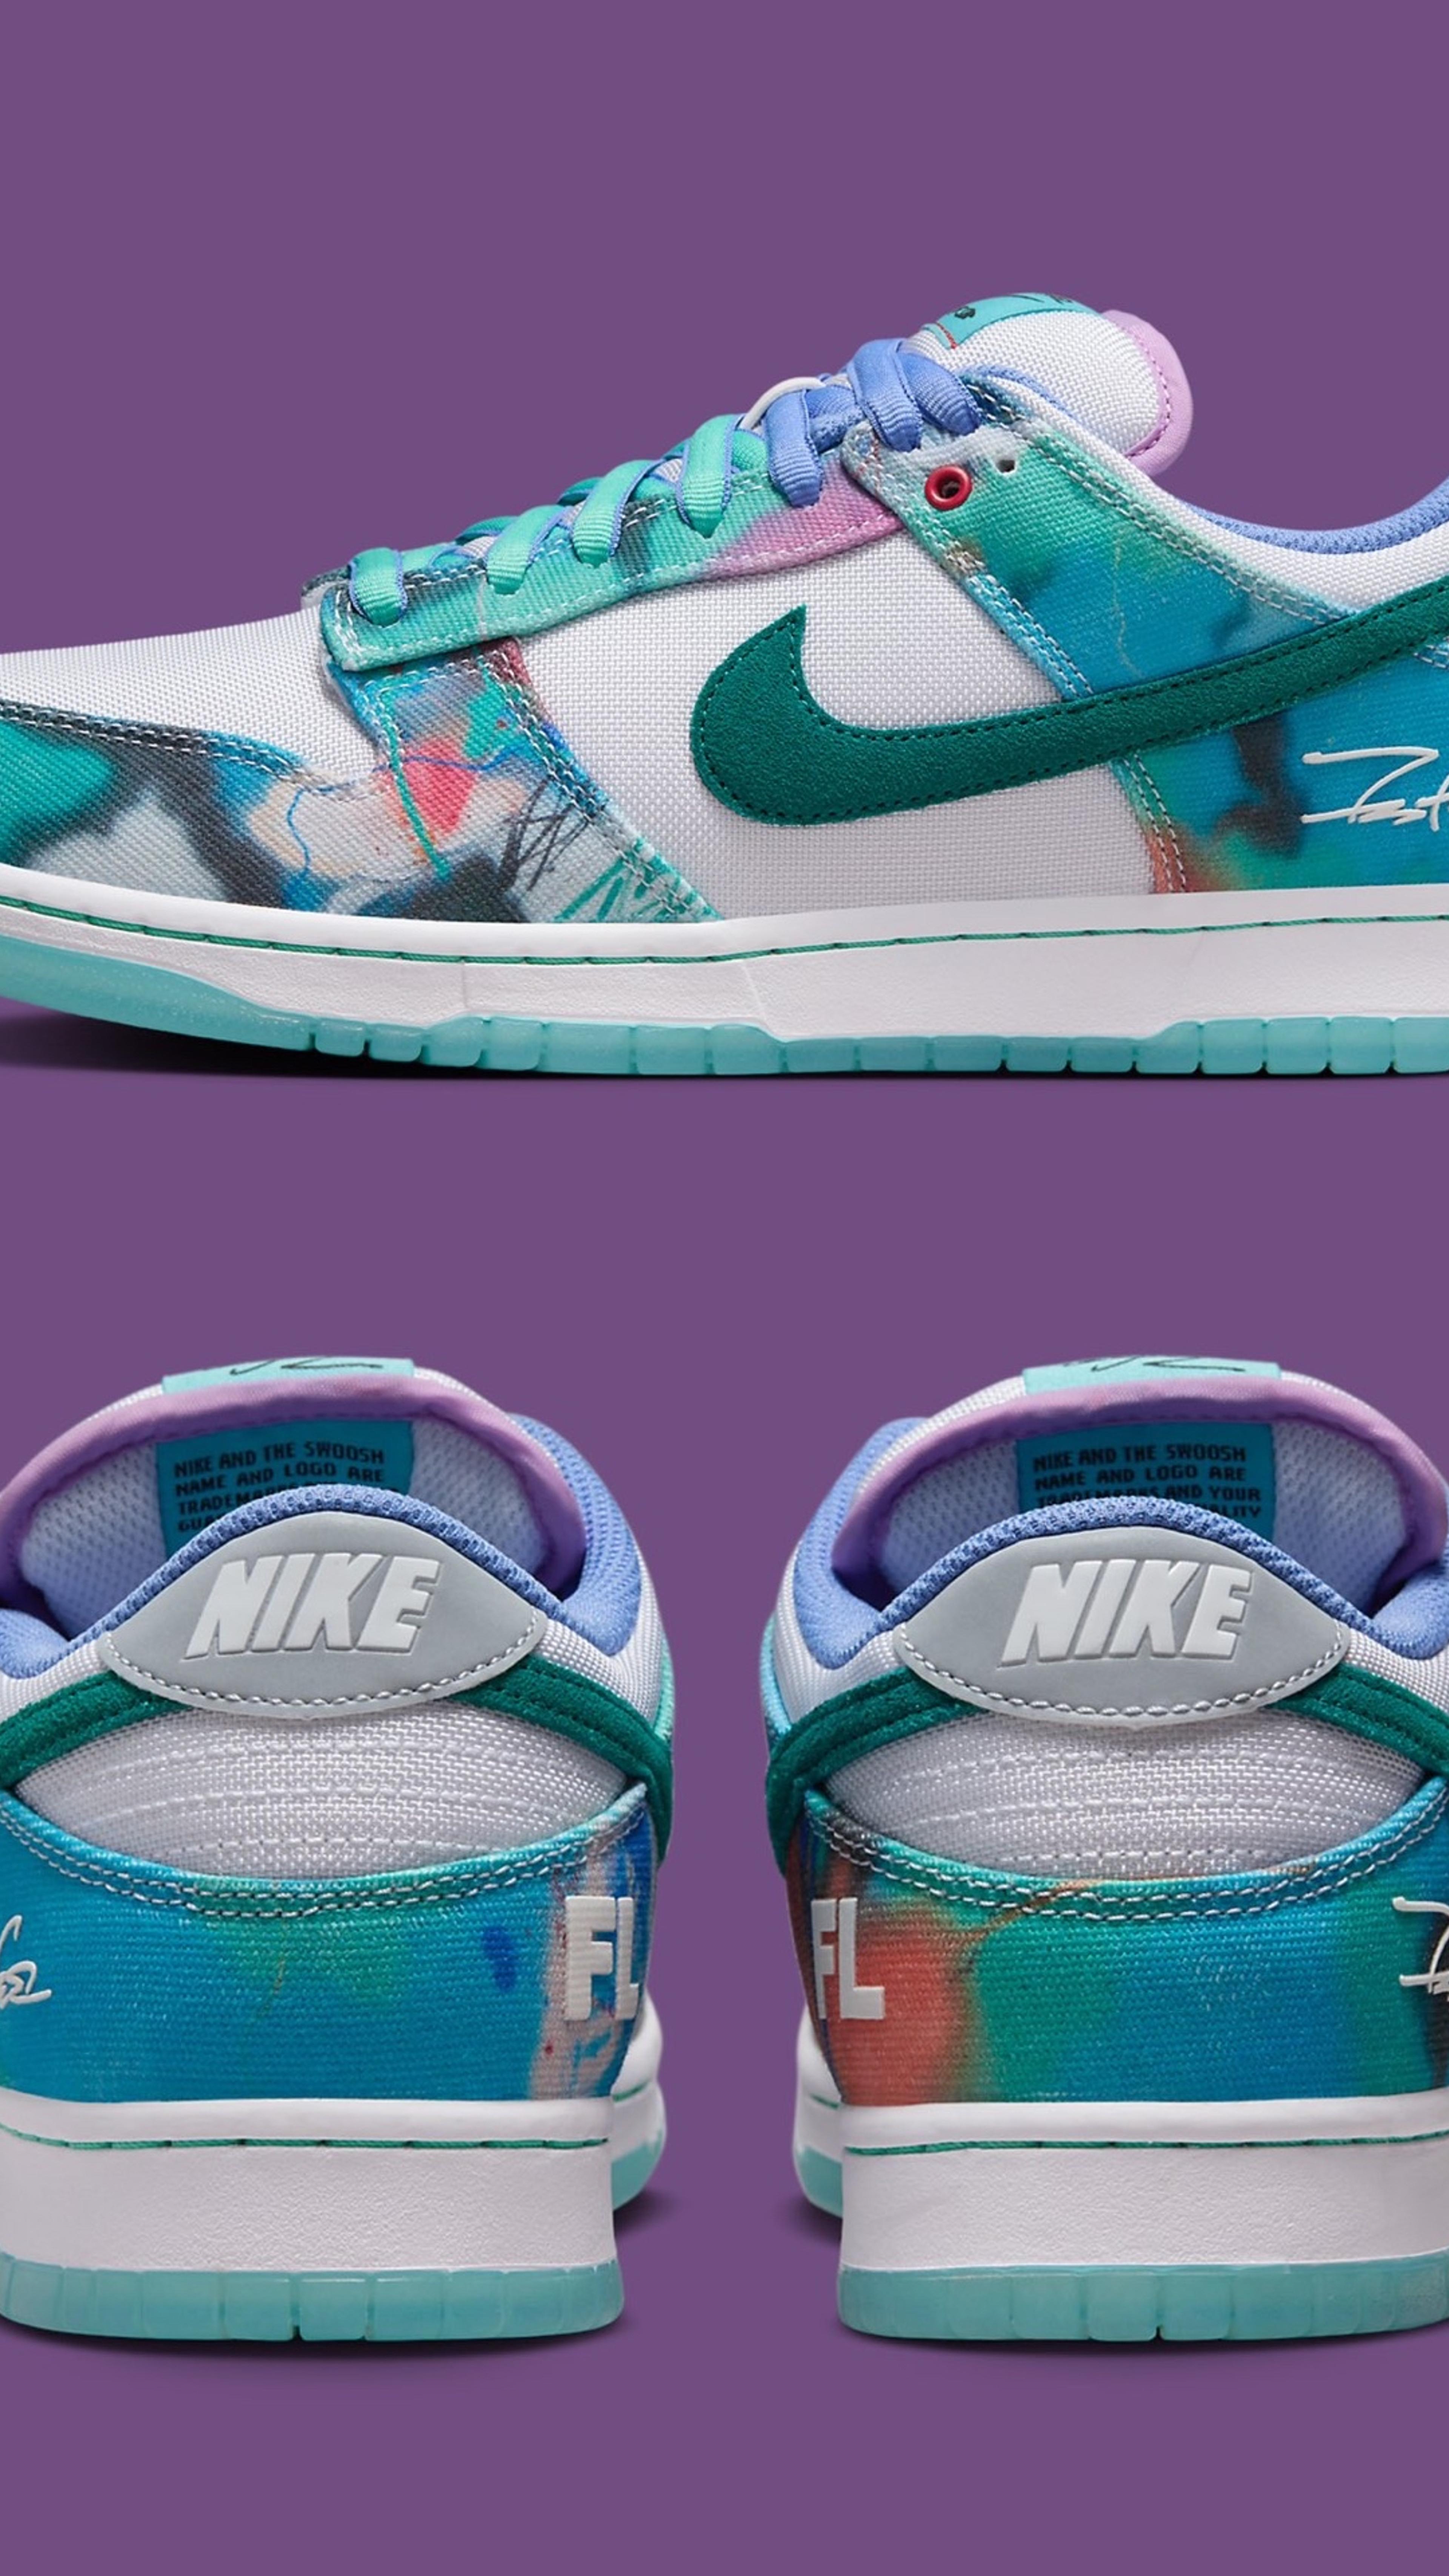 Preview image for the show titled "Mys Wheel- ANY SIZE DS SB DUNK FUTURA Laboratories Bleached Aqua" at May 10, 2024